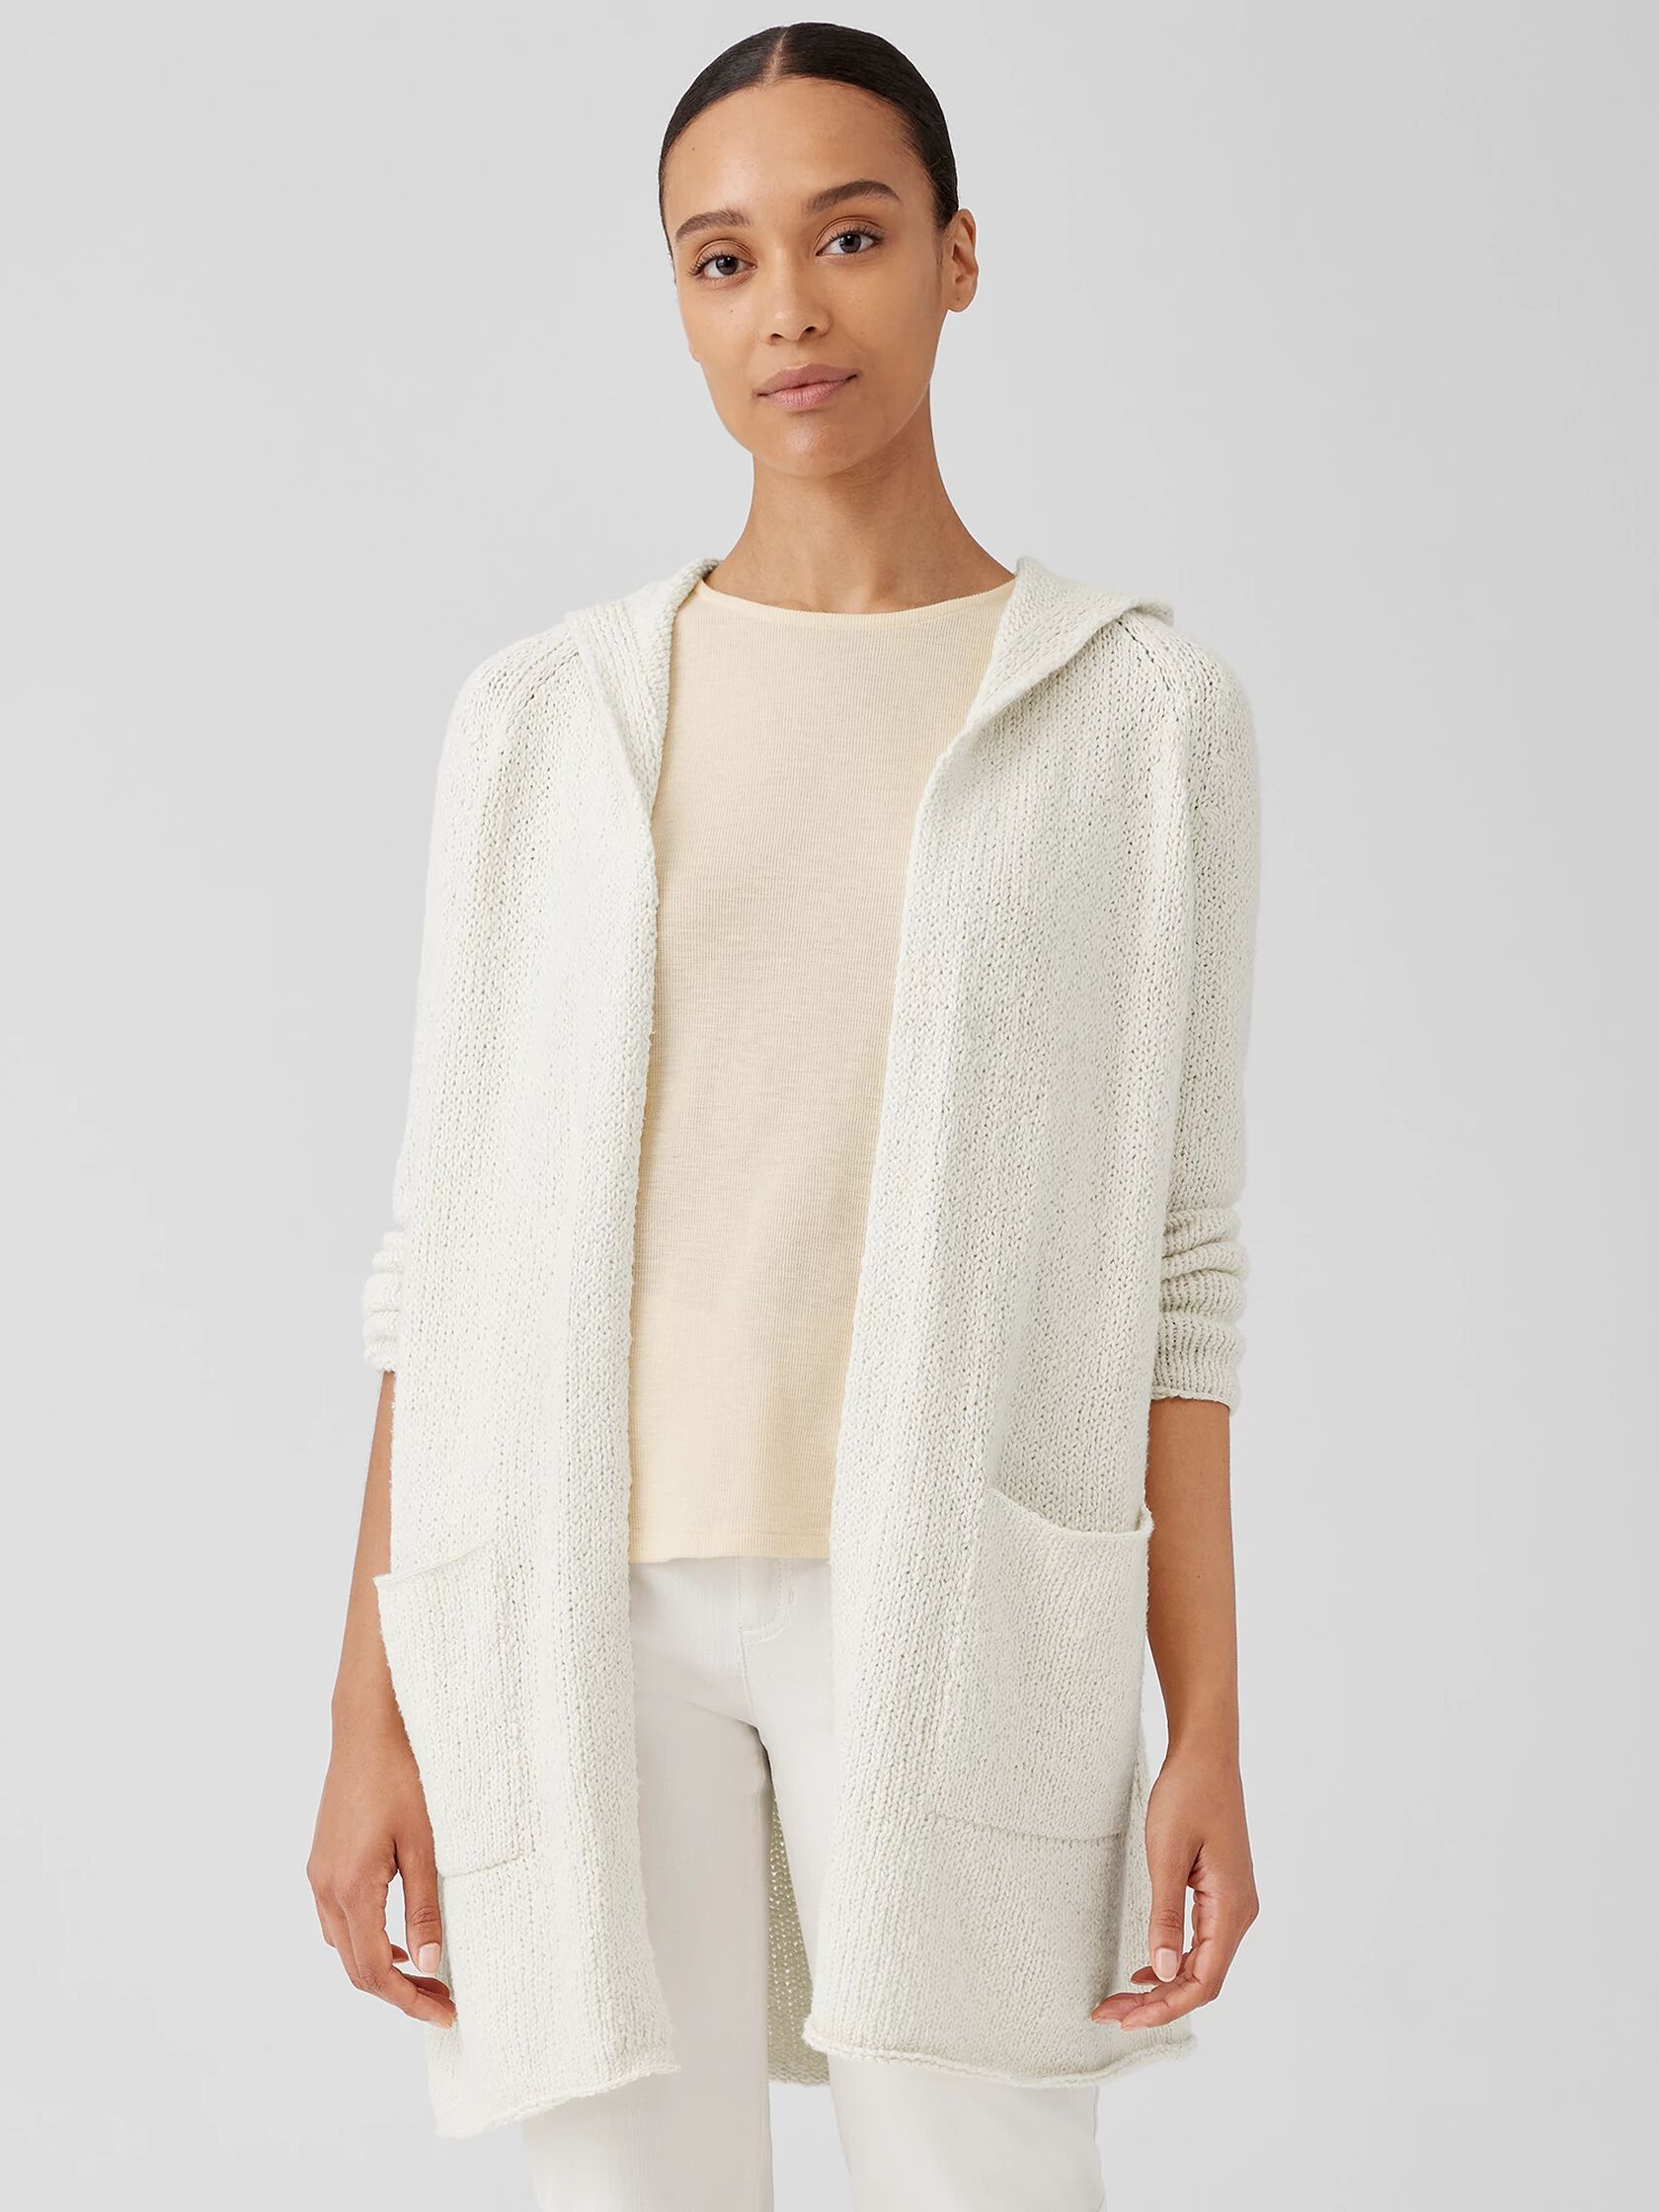 chat Creature Father fage Peruvian Organic Cotton Crimp Hooded Cardigan | EILEEN FISHER